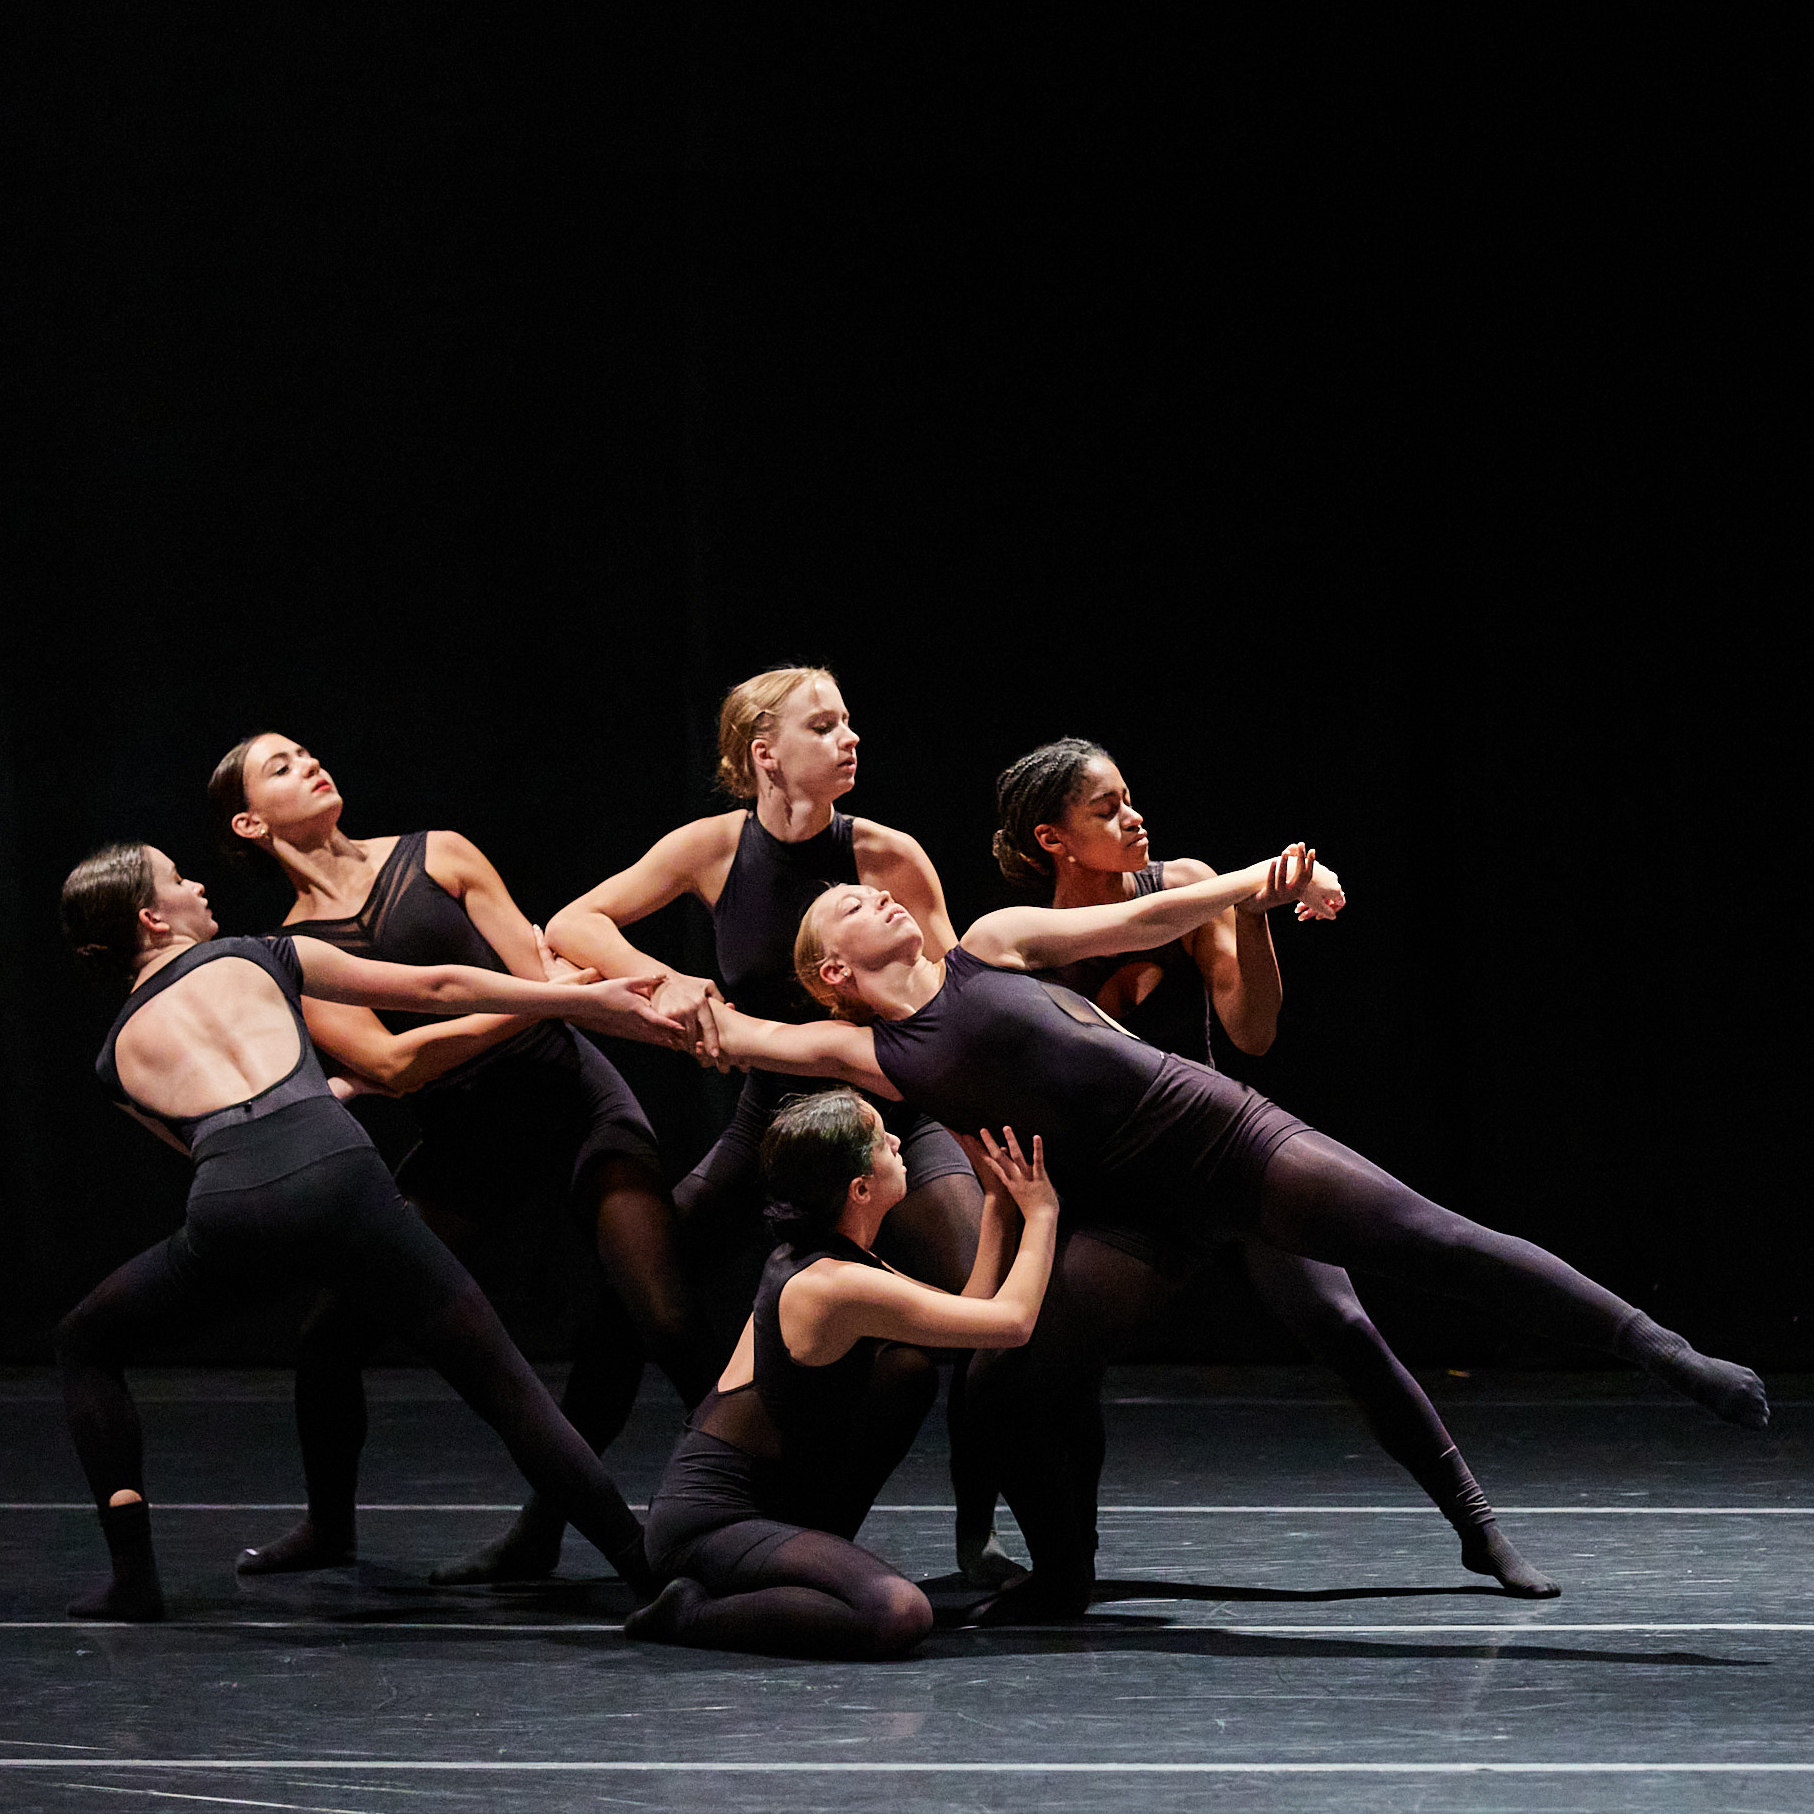 A group of six teen female dancers performing in black costumes. Five dancers are supporting a sixth dancer as she falls backwards.